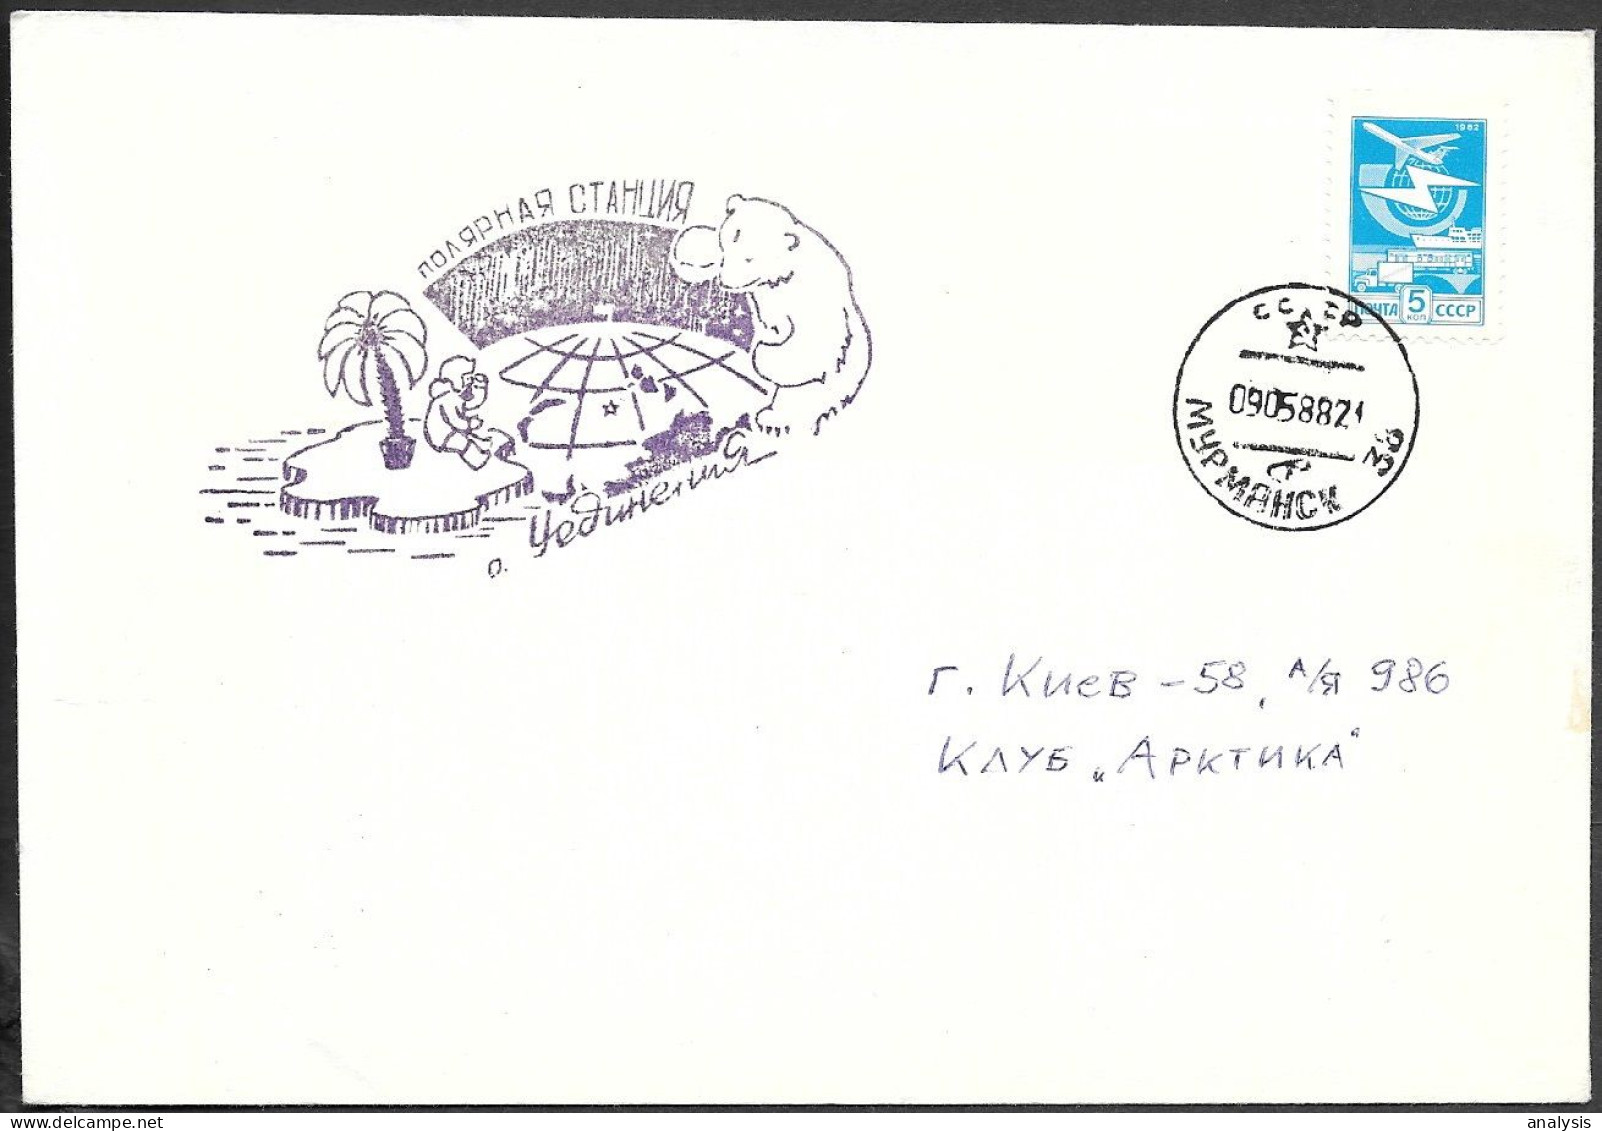 Russia Murmansk Arctic North Pole Station Cover 1988 - Scientific Stations & Arctic Drifting Stations